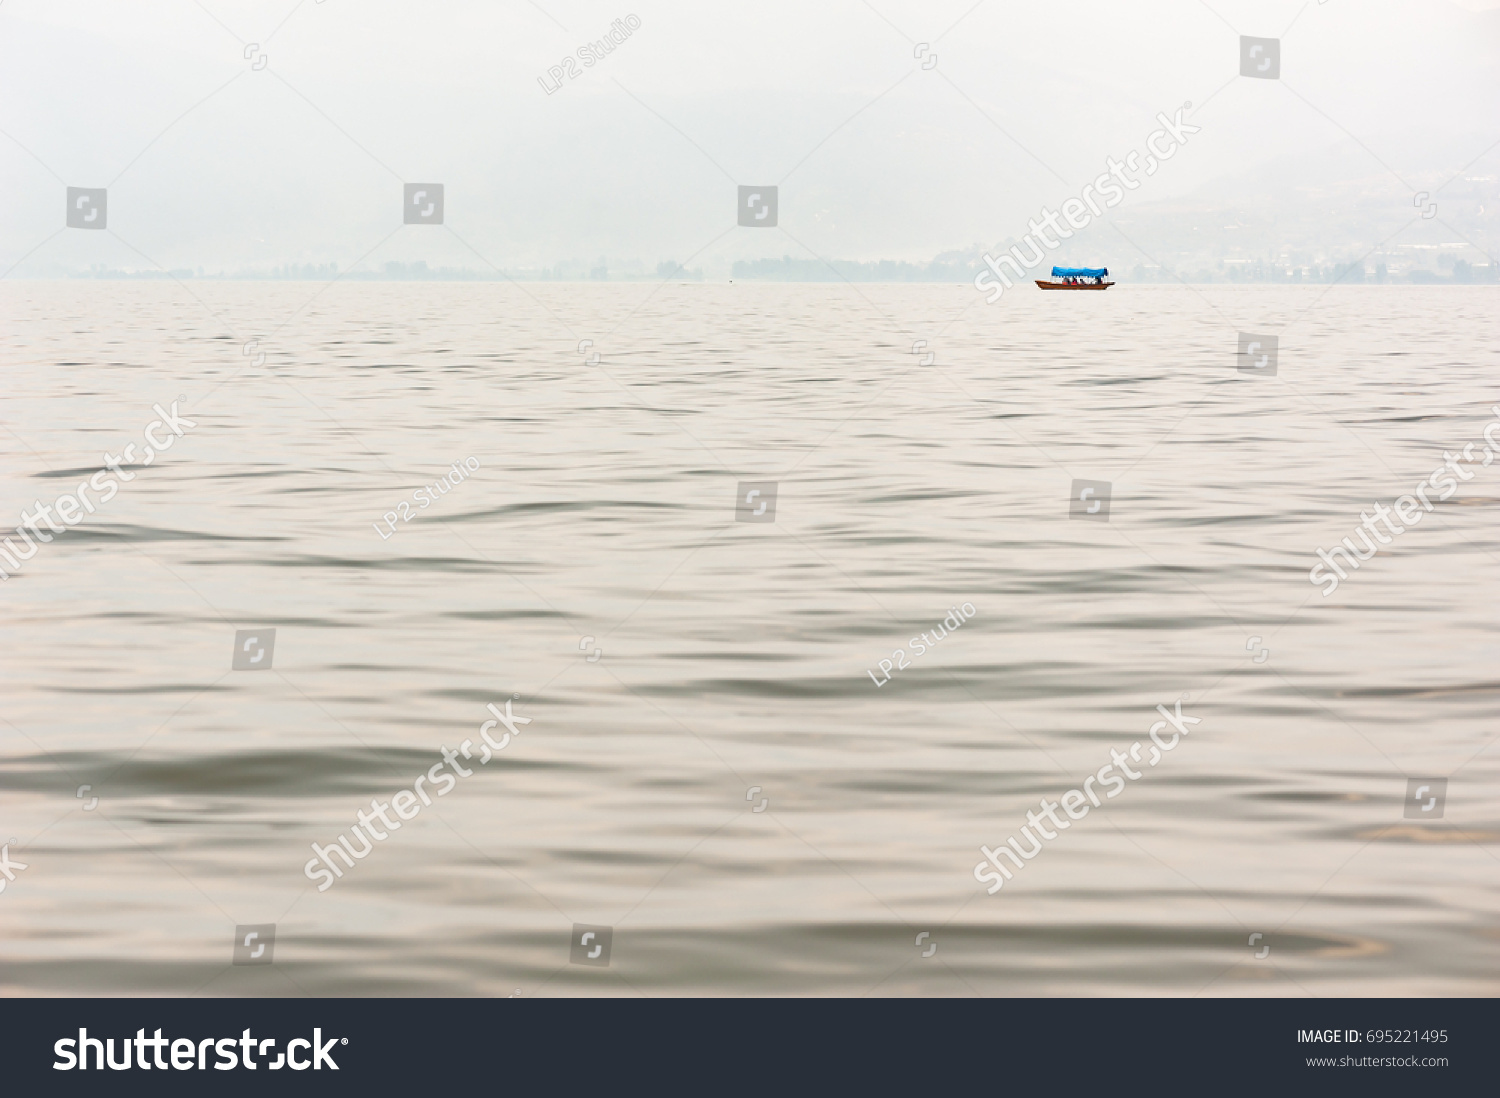 Small boat on a lake in the haze with mountains in the background #695221495